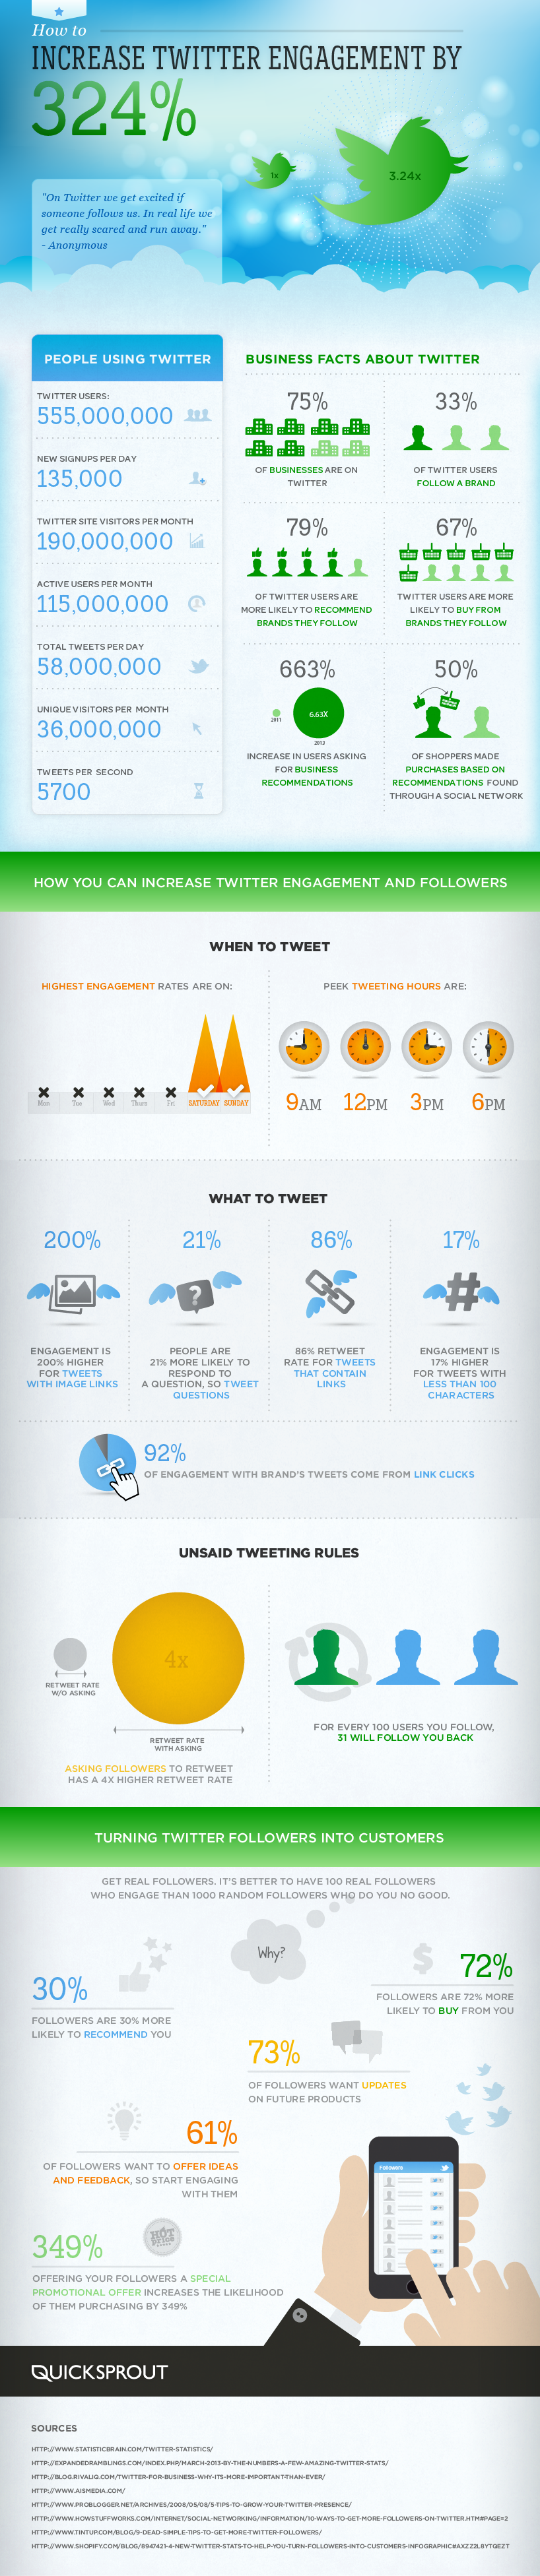 how to grow your Twitter traffic and engagement by 324%.